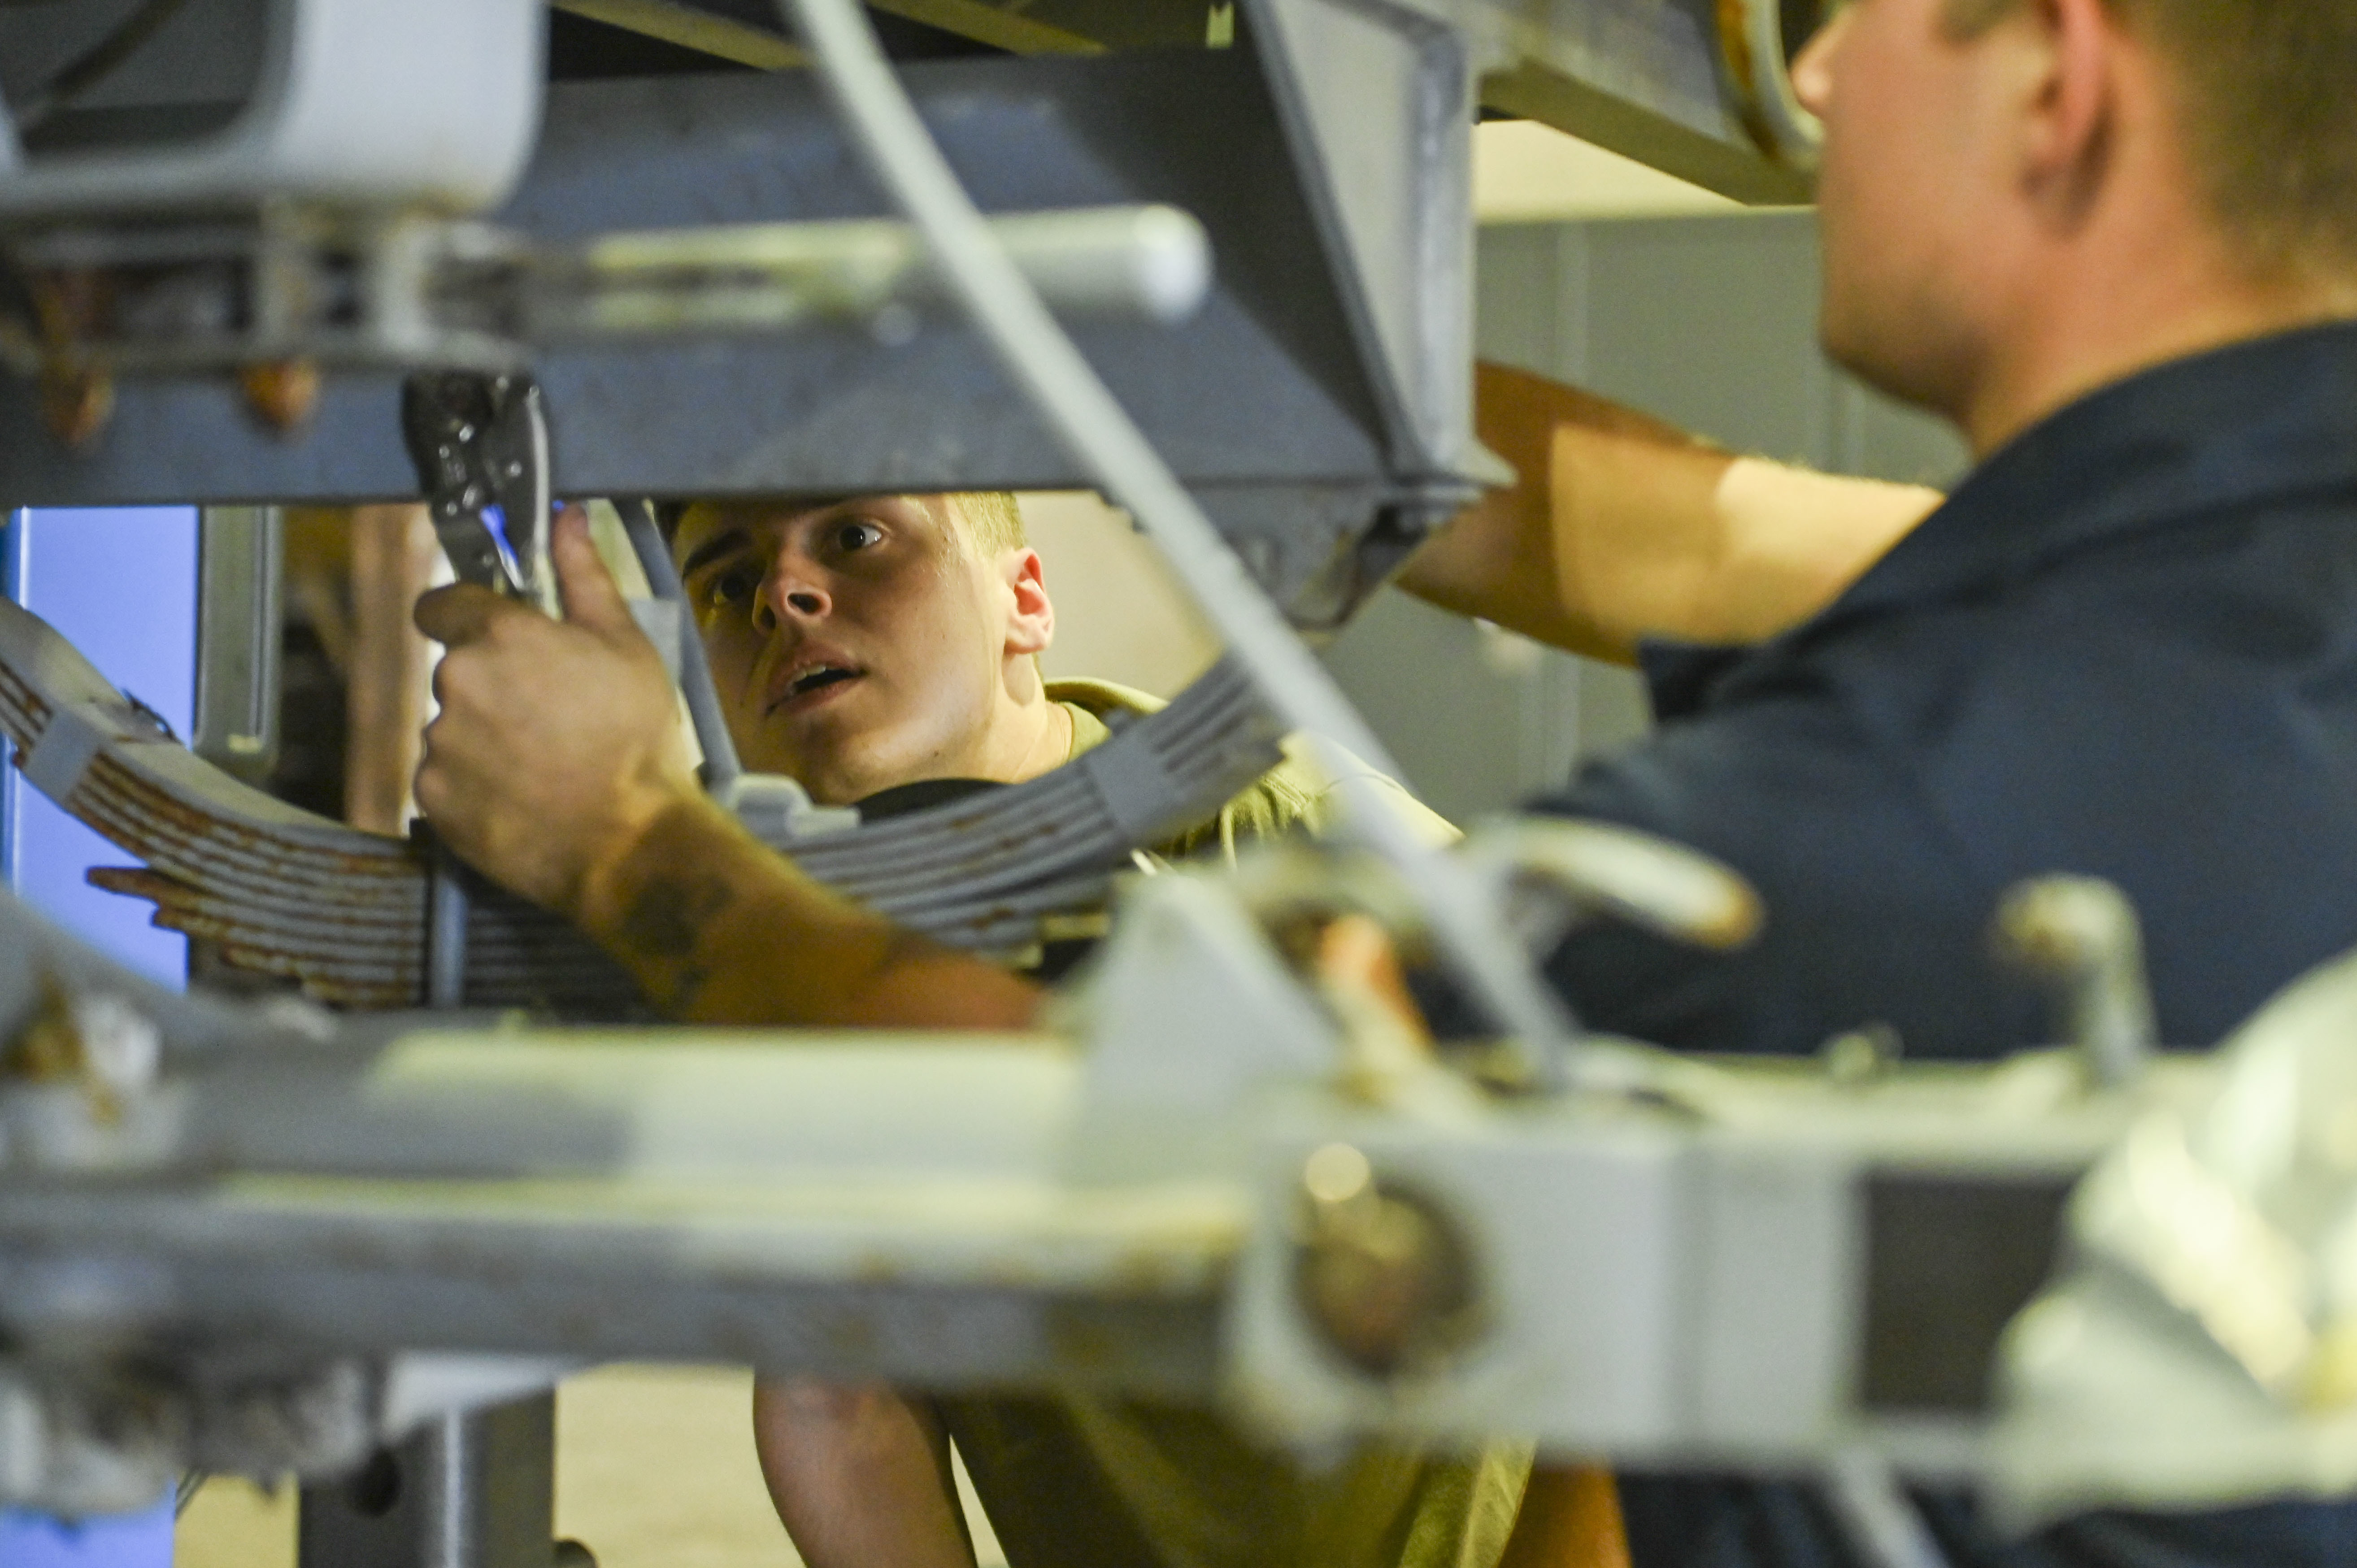 Airman 1st Class Robert Collins watches while Samuel Benson removes a stainless-steel brake line on a munitions trailer. U.S. Air Force photo by Breanna Christopher Volkmar.